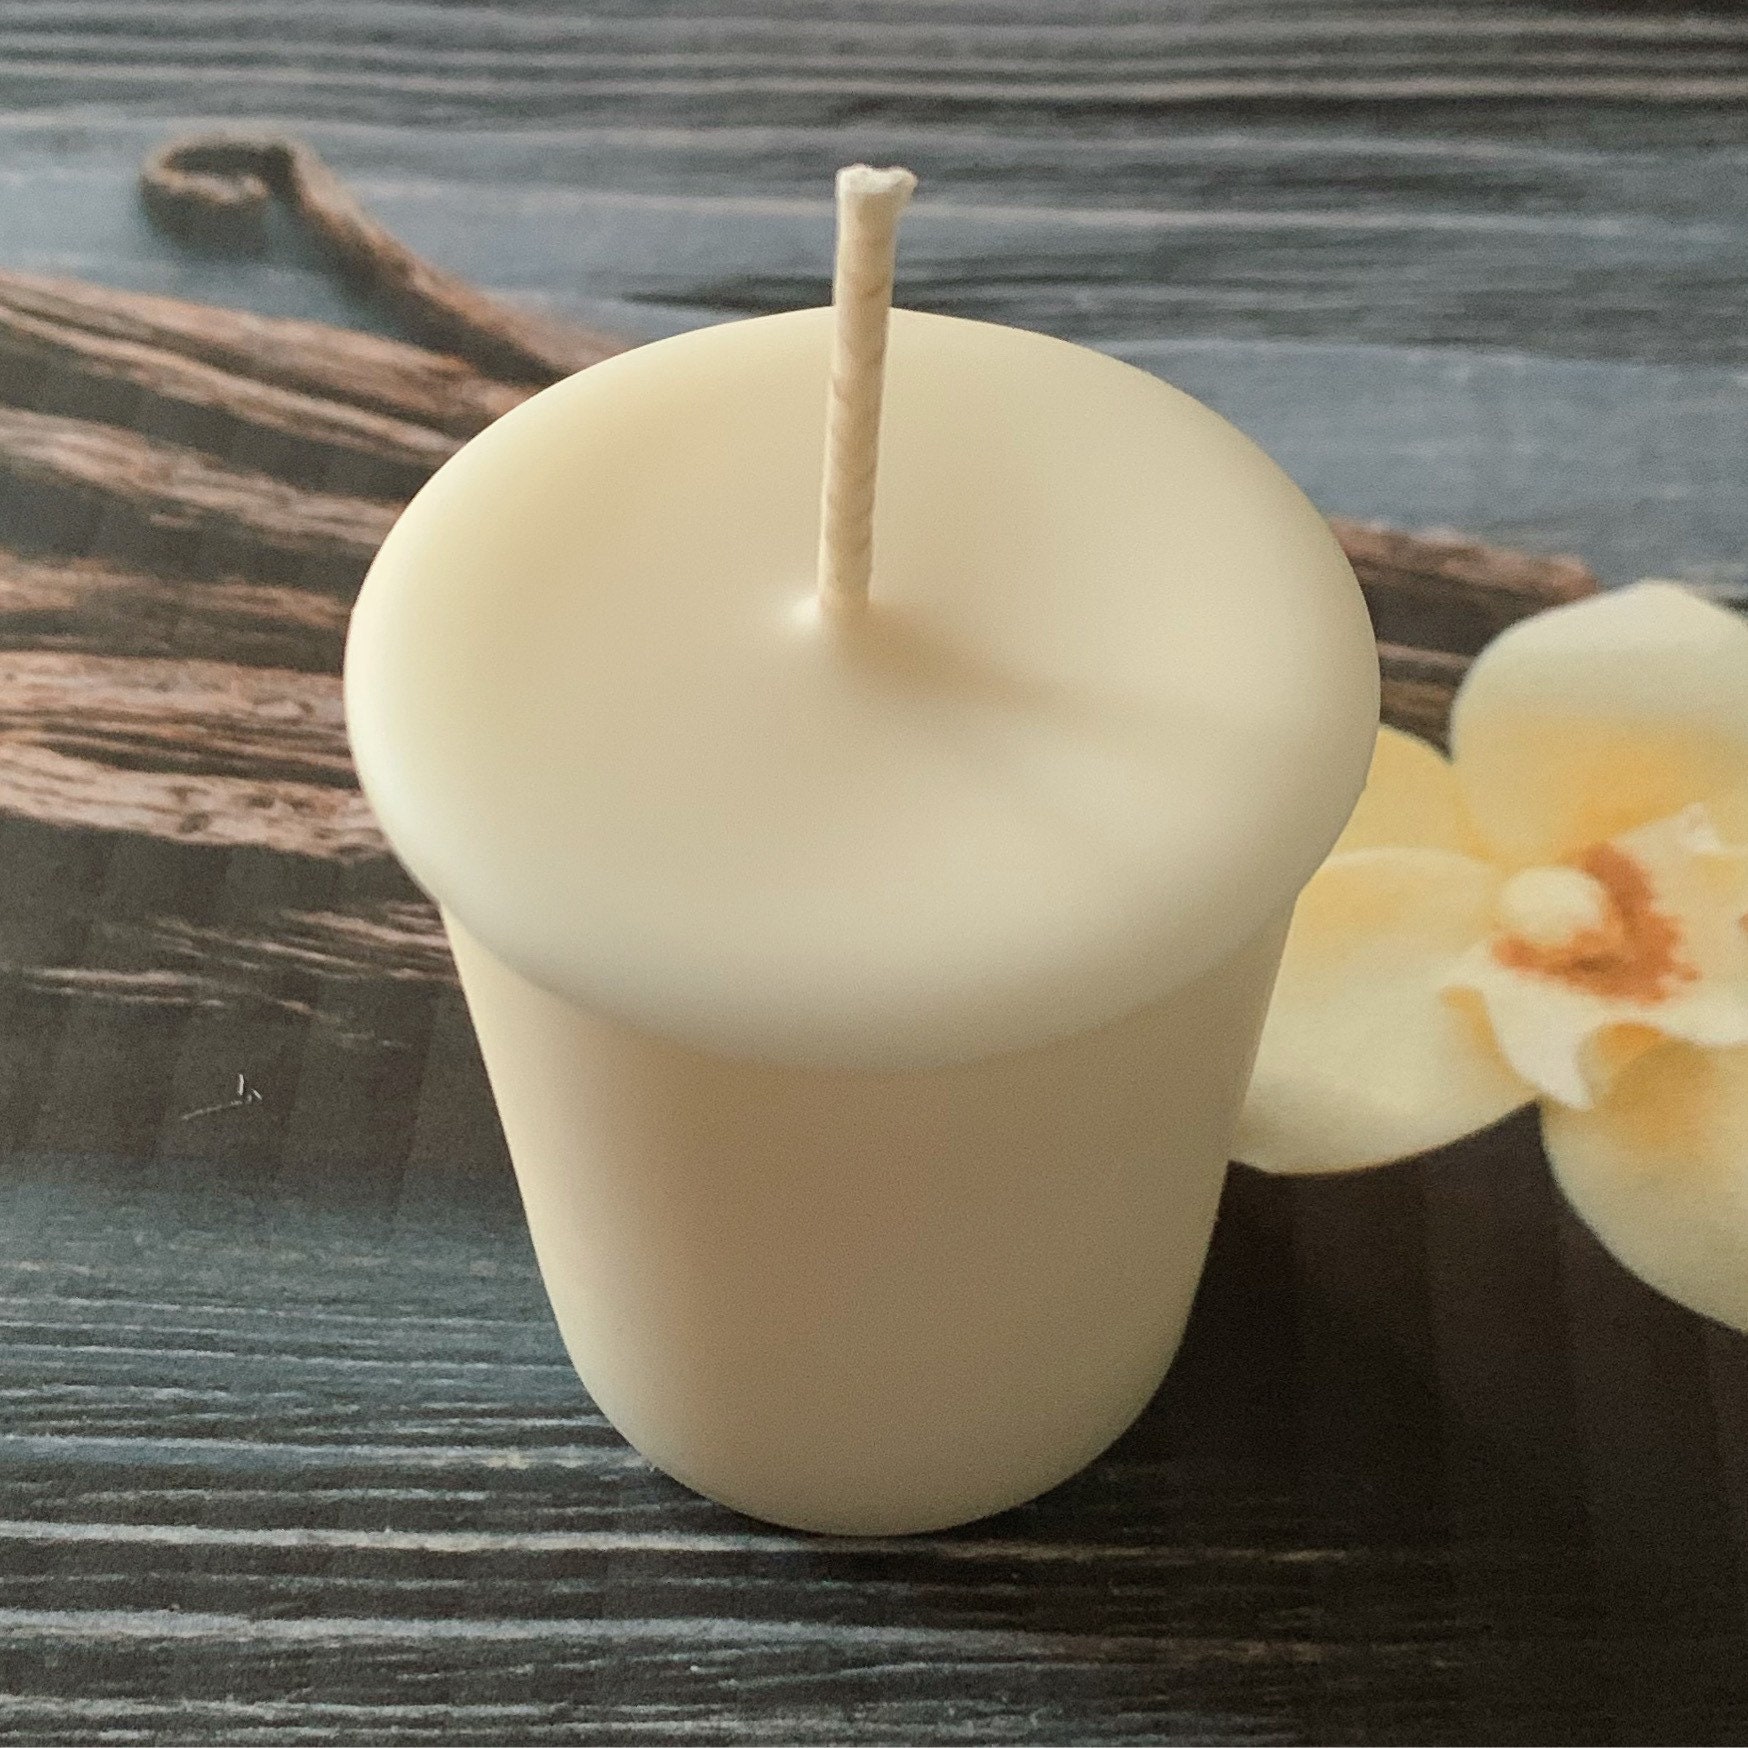 Beeswax Flat Top Votives Pure Beeswax Candles Directly From the Beekeeper 